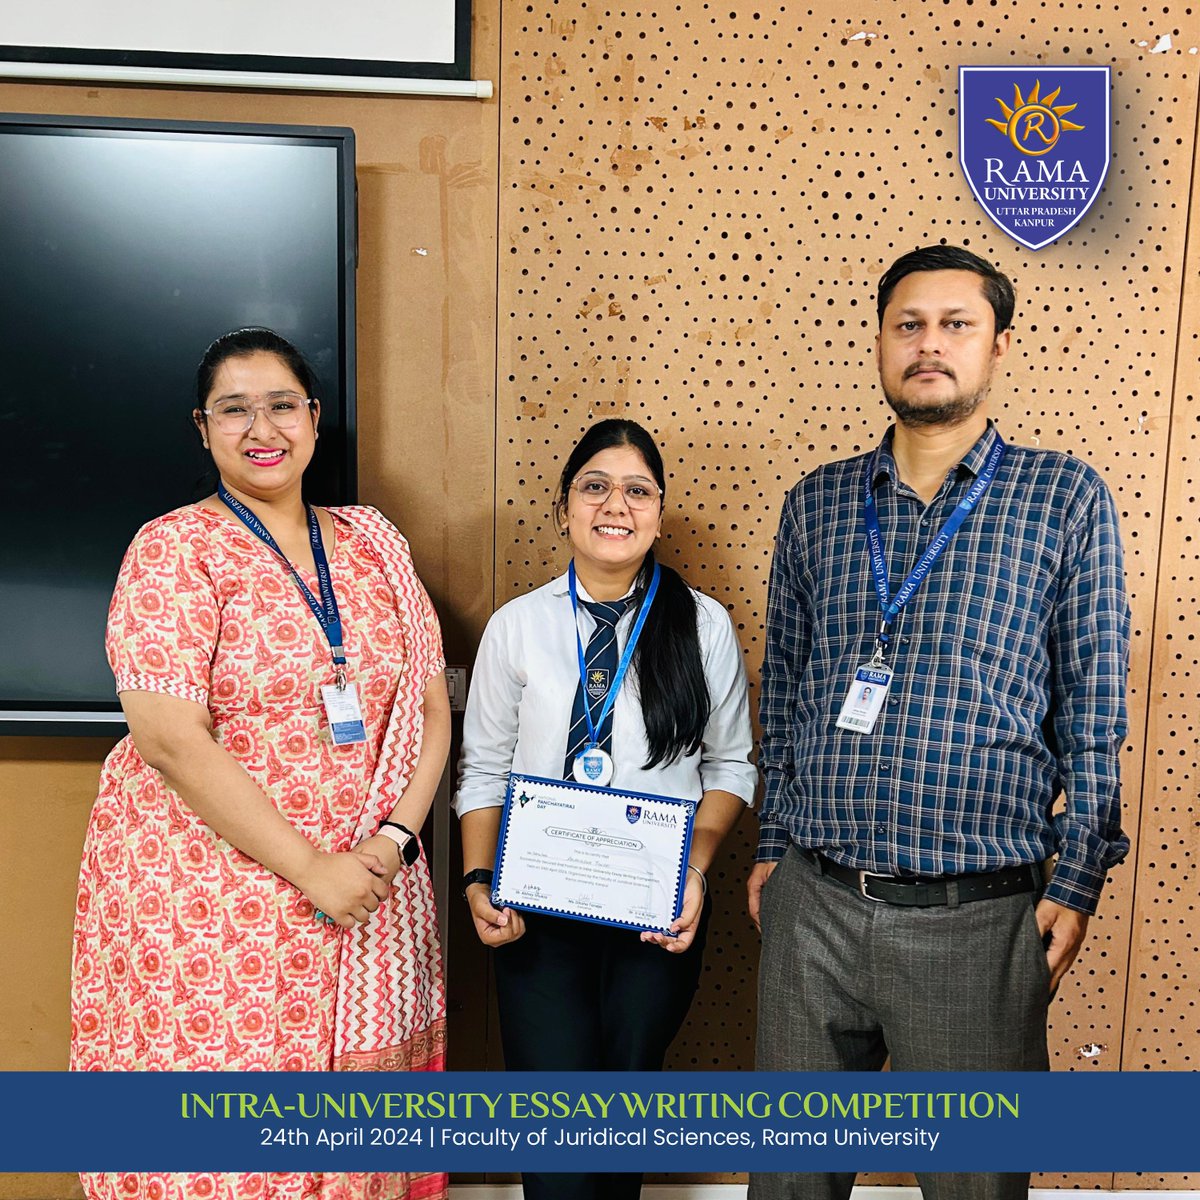 Intra-University Essay Writing Competition at Rama University🌟

#EssayCompetition #WritingContest #AcademicExcellence #Scholarship #Wordsmith #Innovation #UniversityLife #RamaUniversity